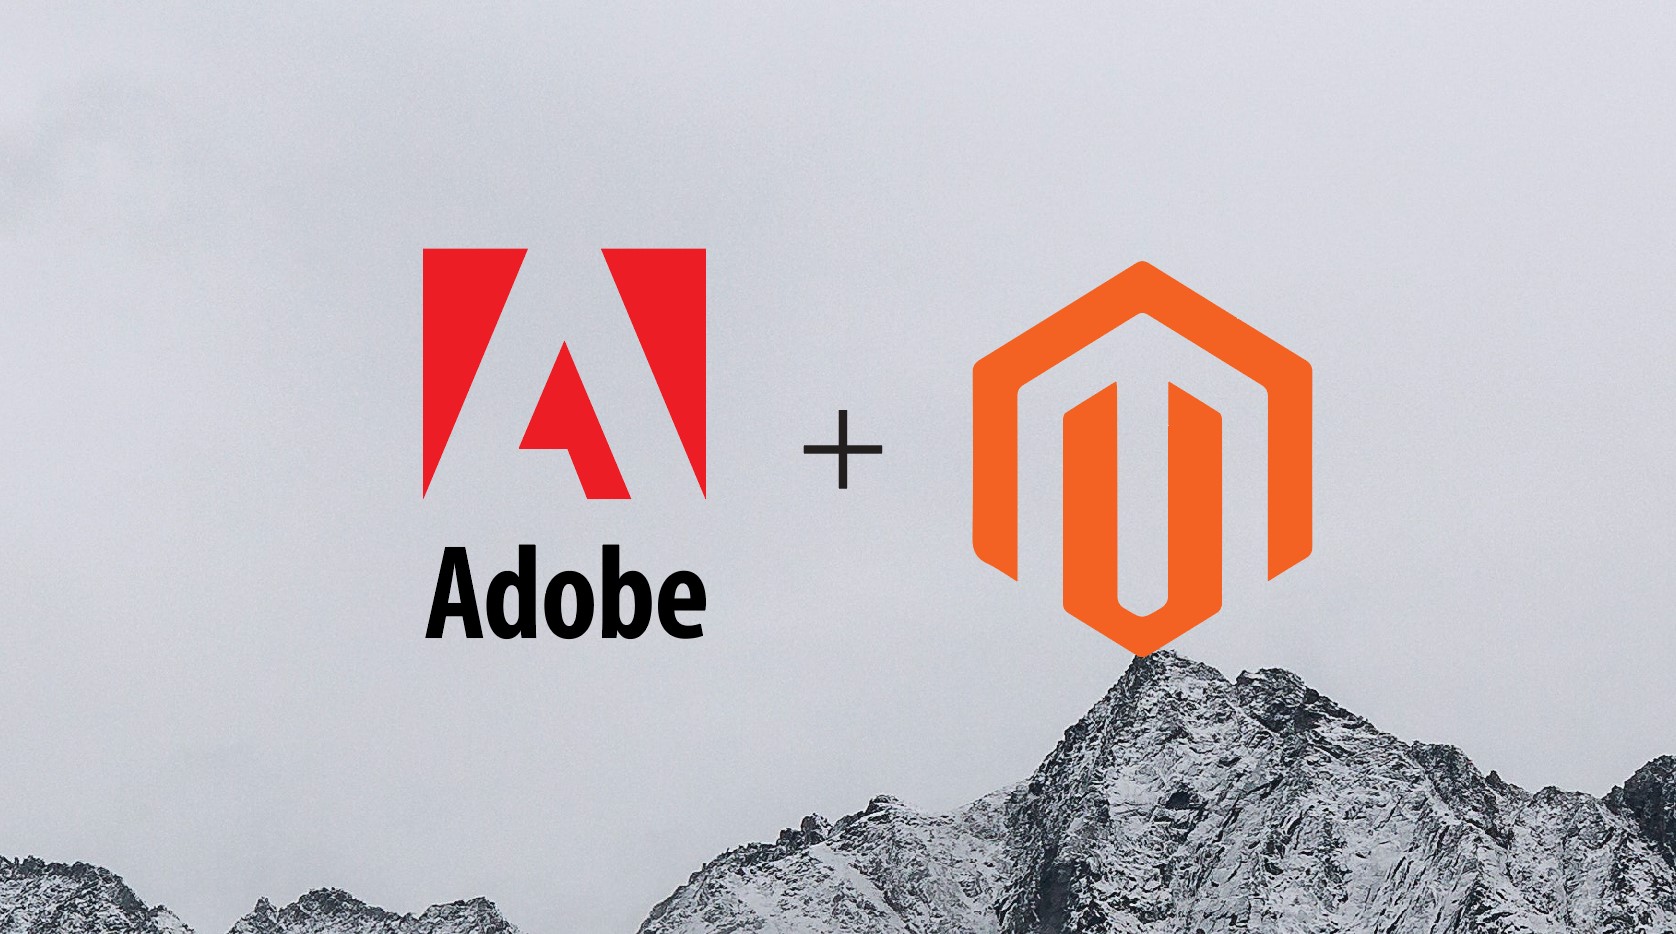 Adobe Acquires Magento: What it Means for Clients, Competitors and Partners